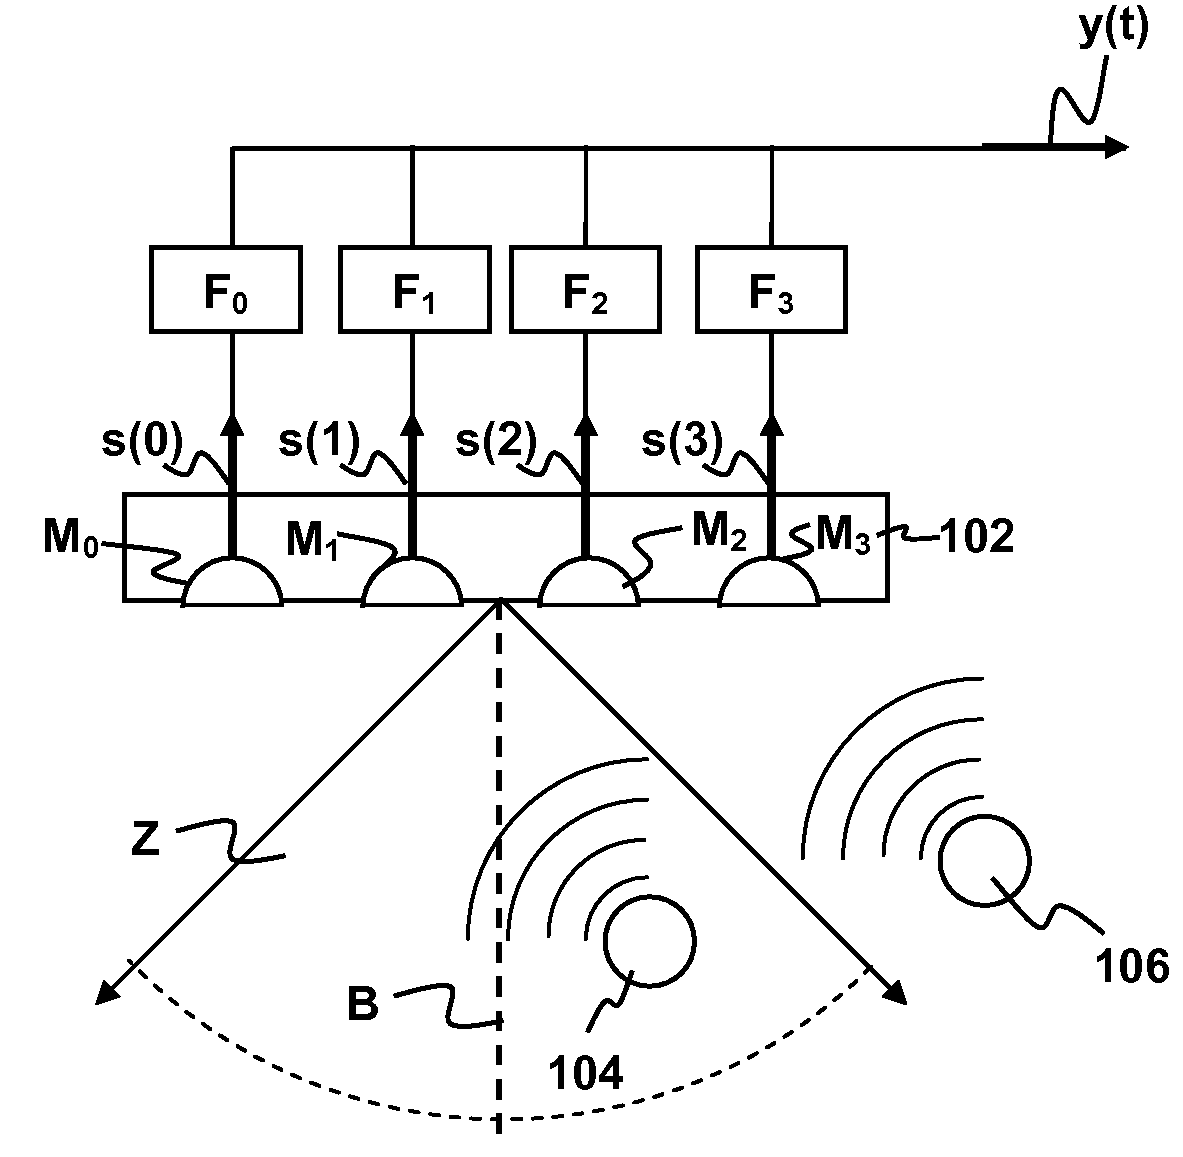 Methods and apparatus for targeted sound detection and characterization